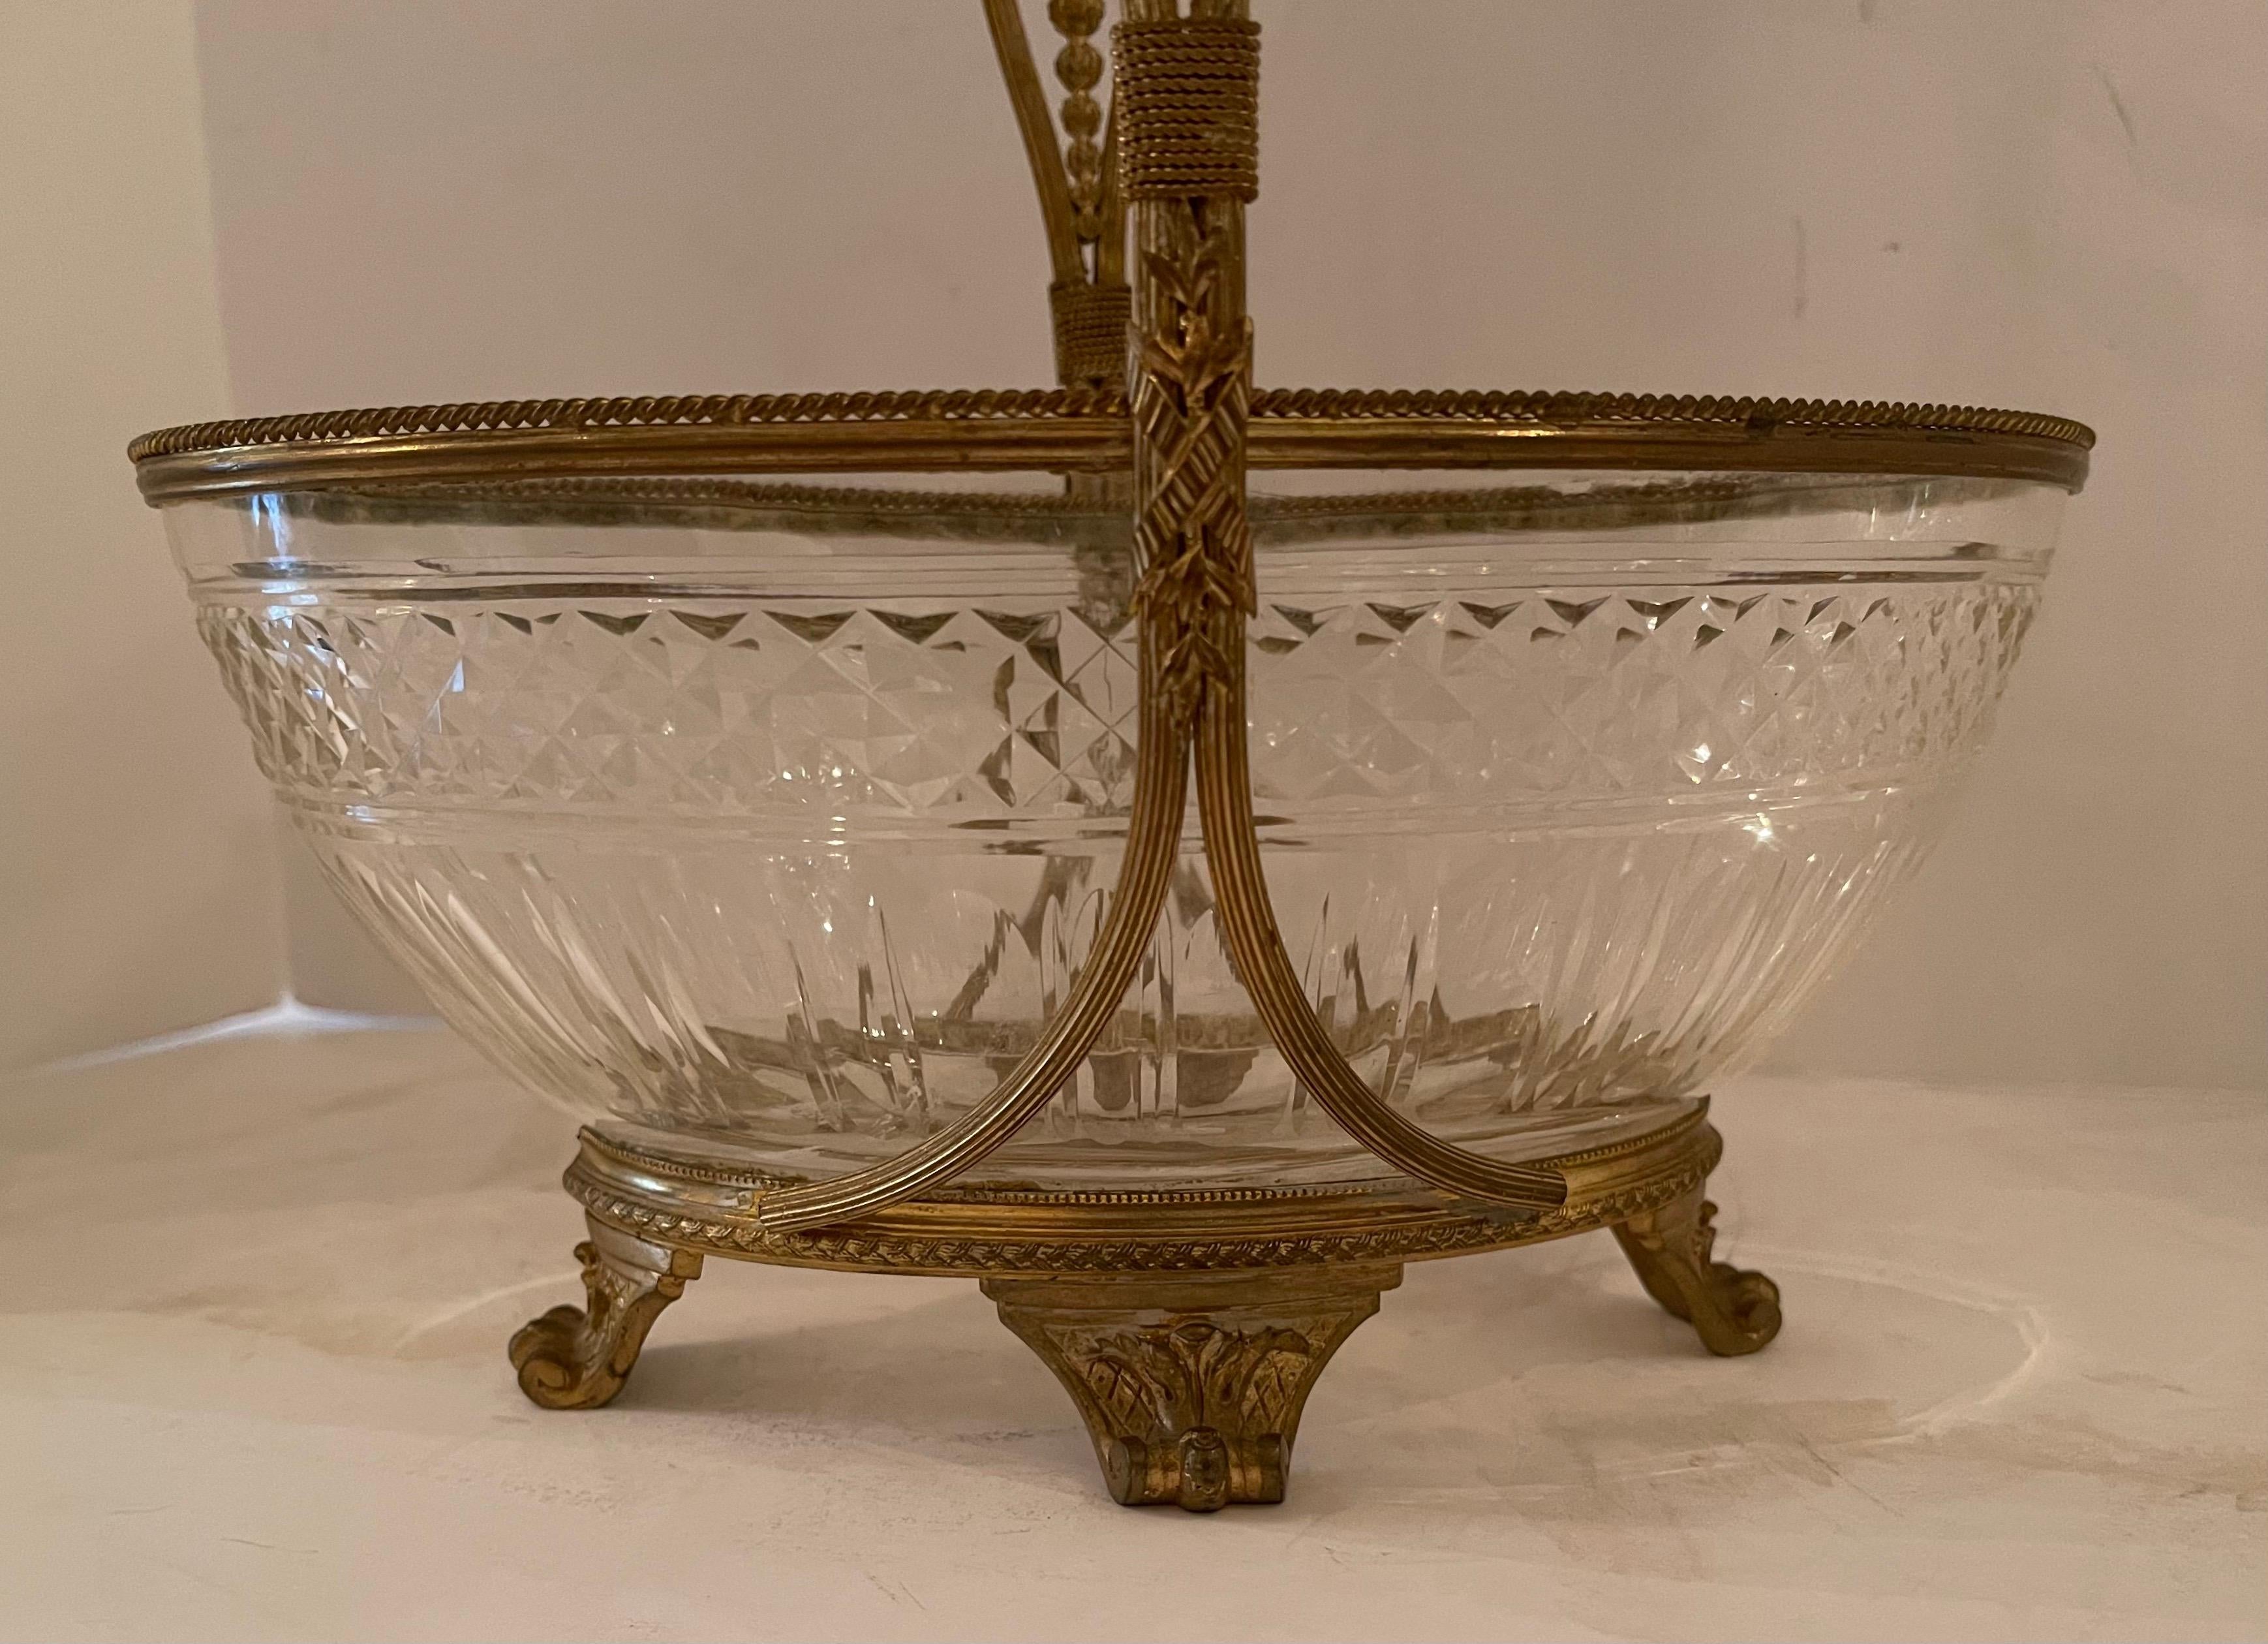 Faceted Wonderful French Baccarat Dore Bronze Cut Crystal Oval Basket Centerpiece Bowl For Sale